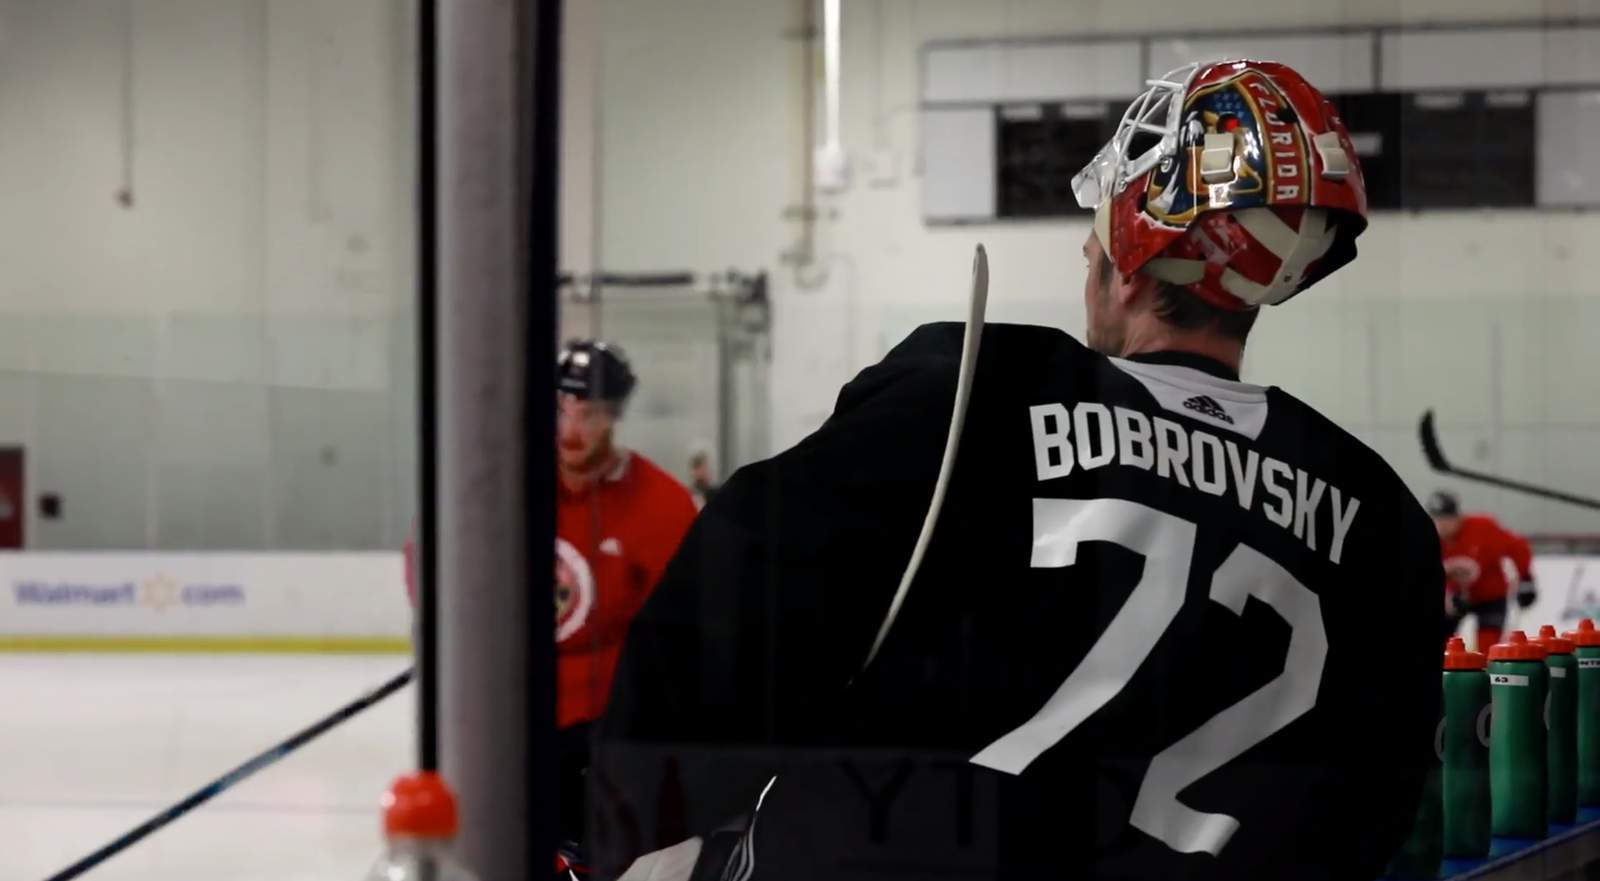 Following NHL stoppage due to COVID-19, Panthers goalie Sergei Bobrovsky is rested, rejuvenated and ready for postseason